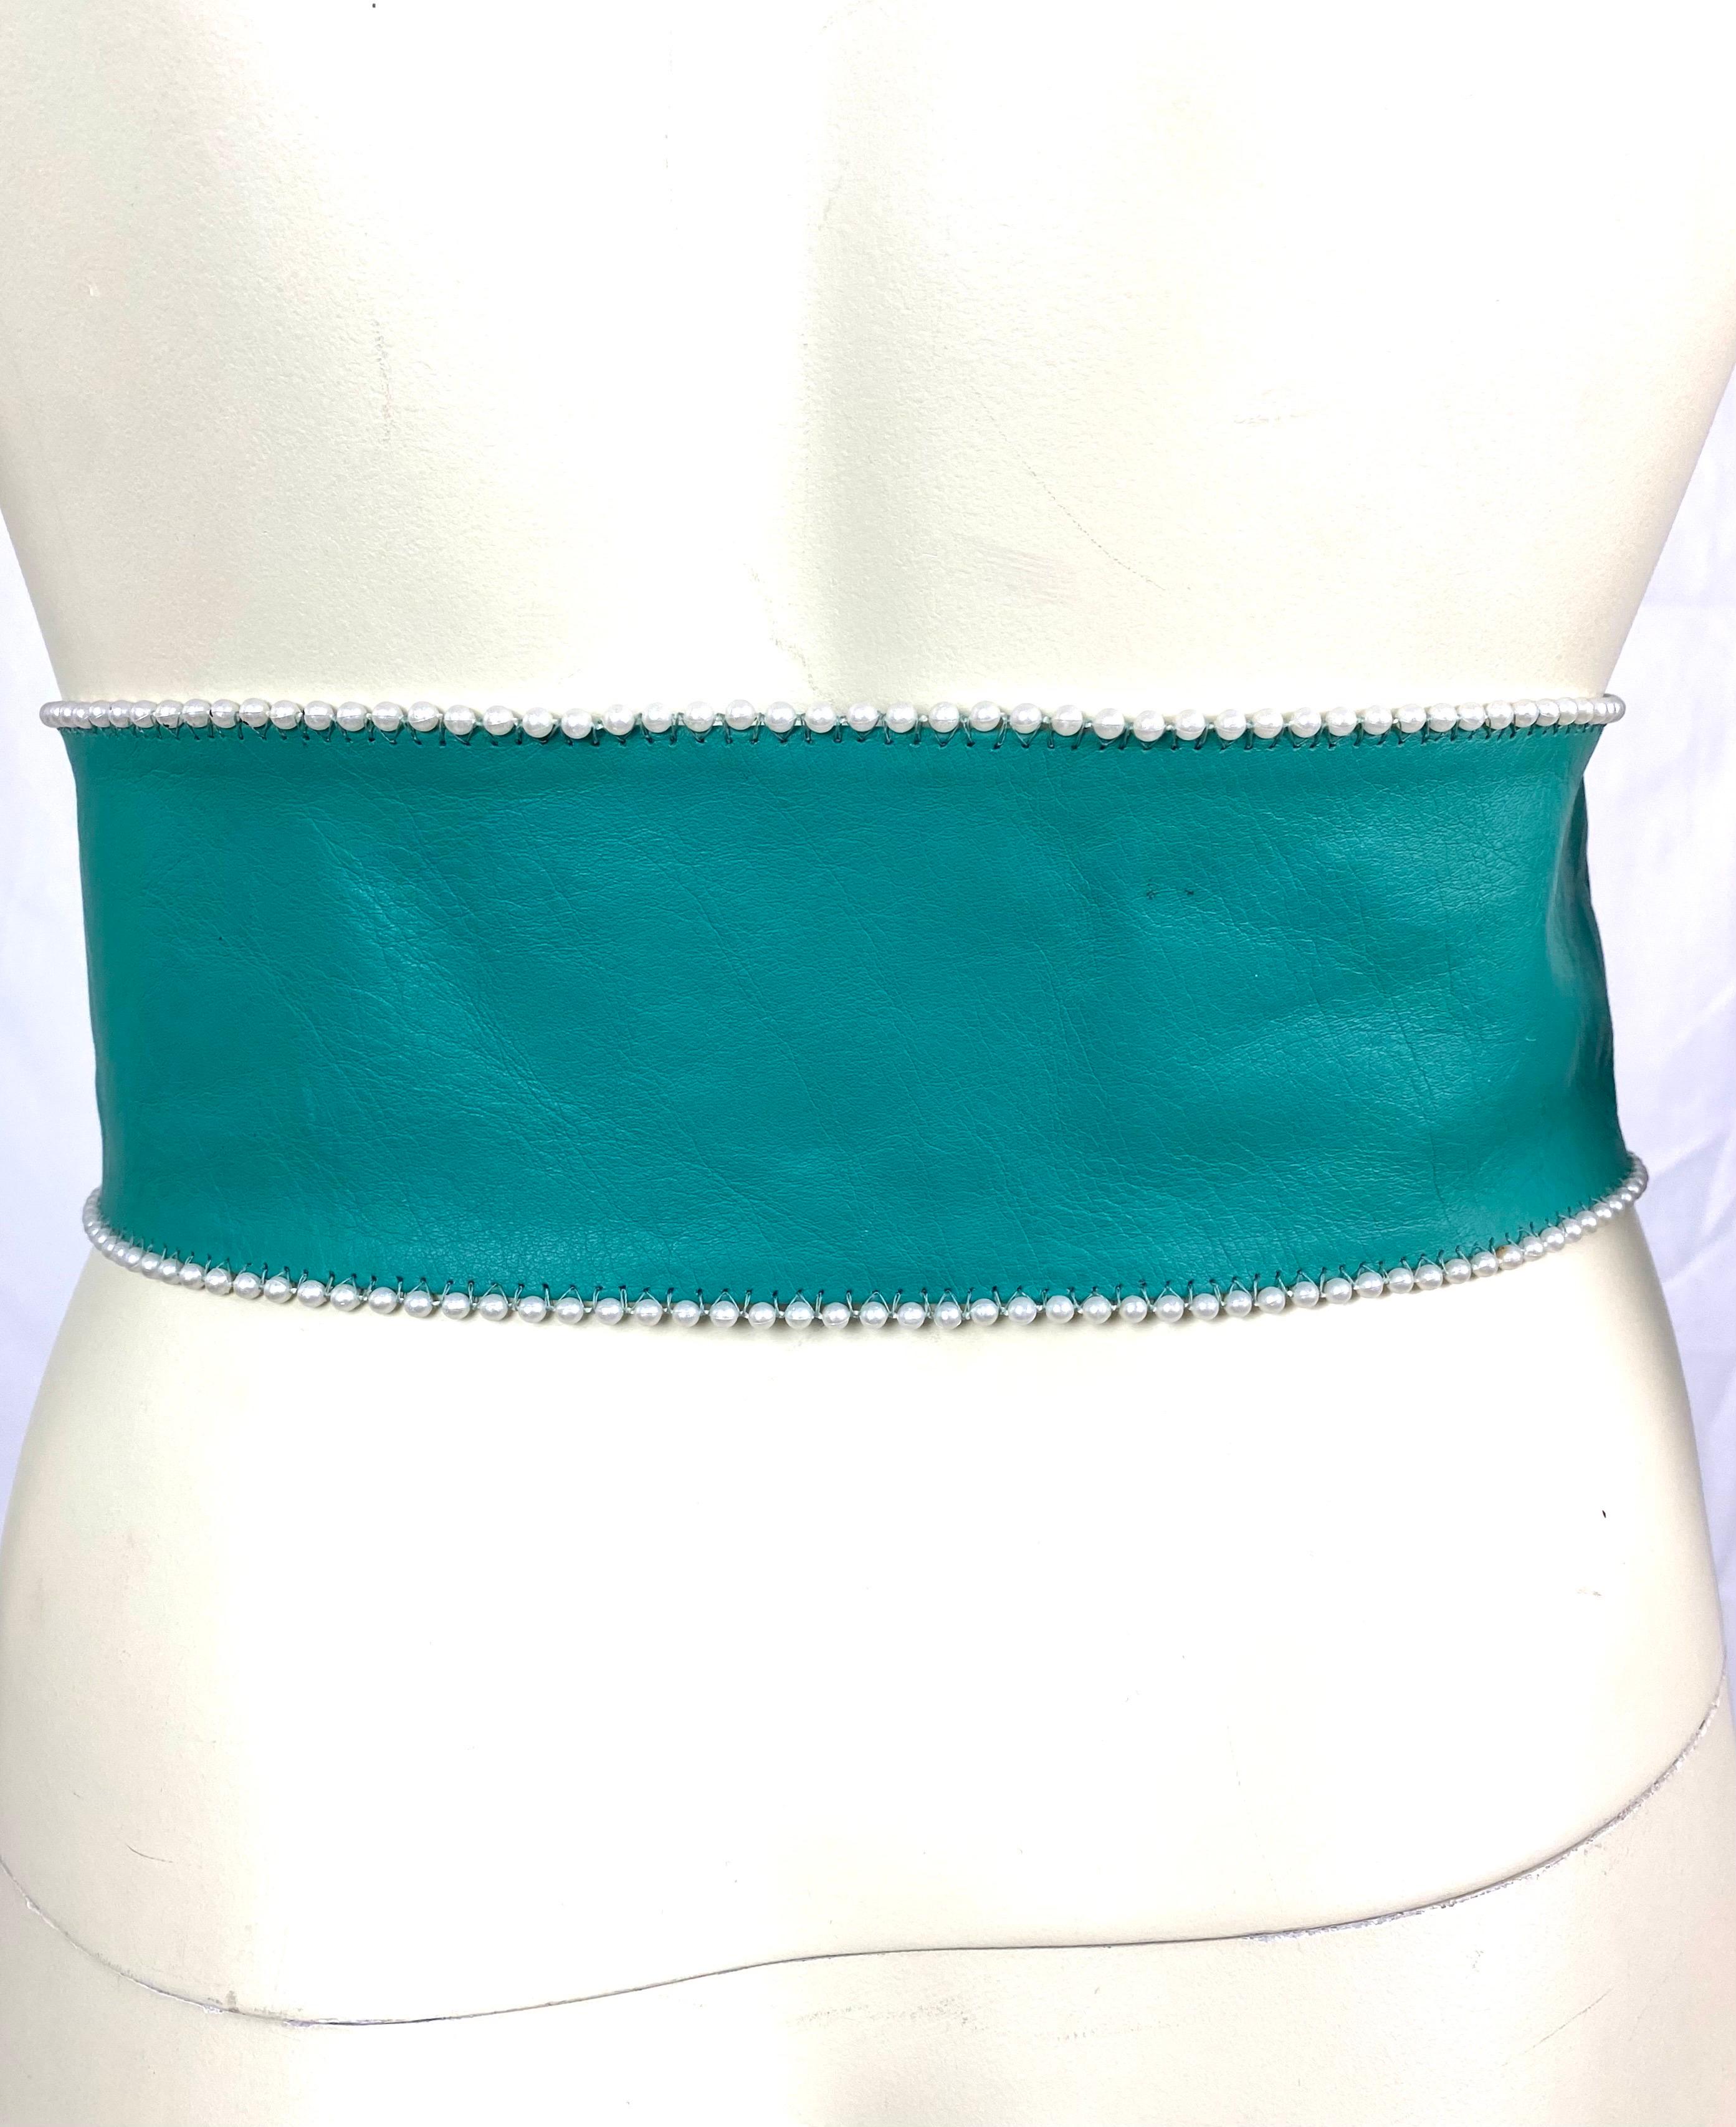 Women's Vintage Yves Saint Laurent turquoise leather belt with pearls and pearly buckle